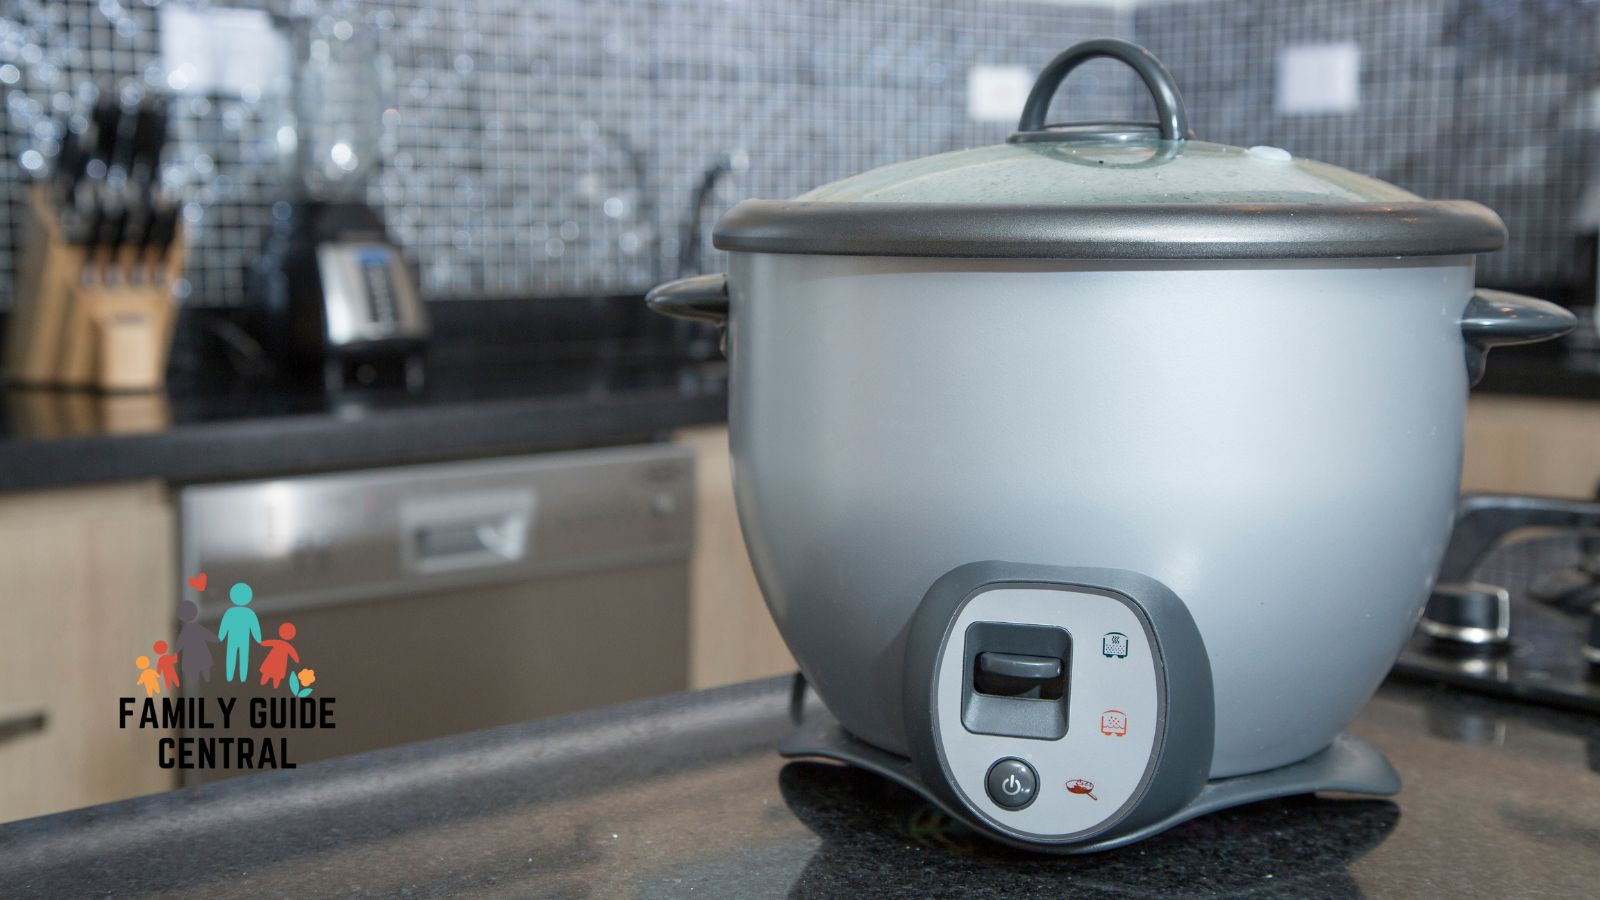 Dirty rice cooker next to dishwasher - familyguidecentral.com